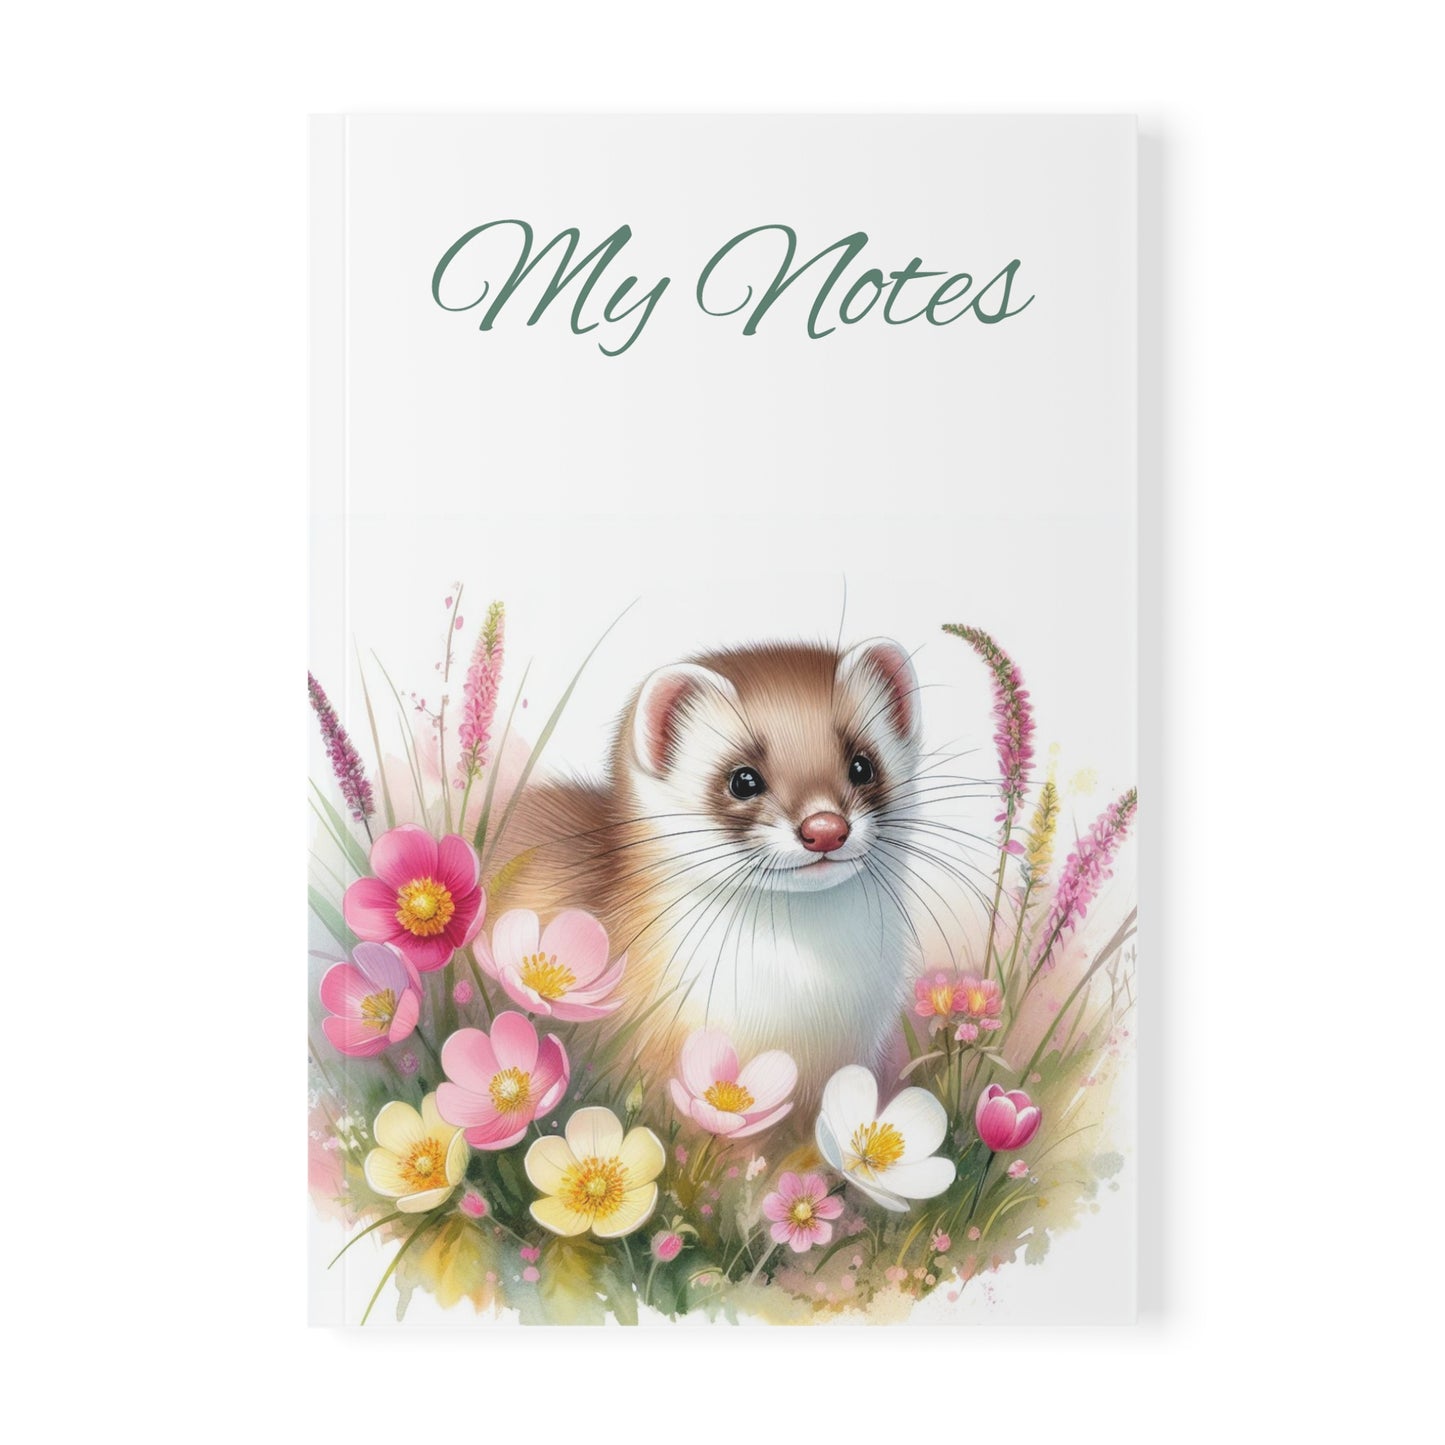 Stoat Softback Notebook | Stationery by Hope Valley Home